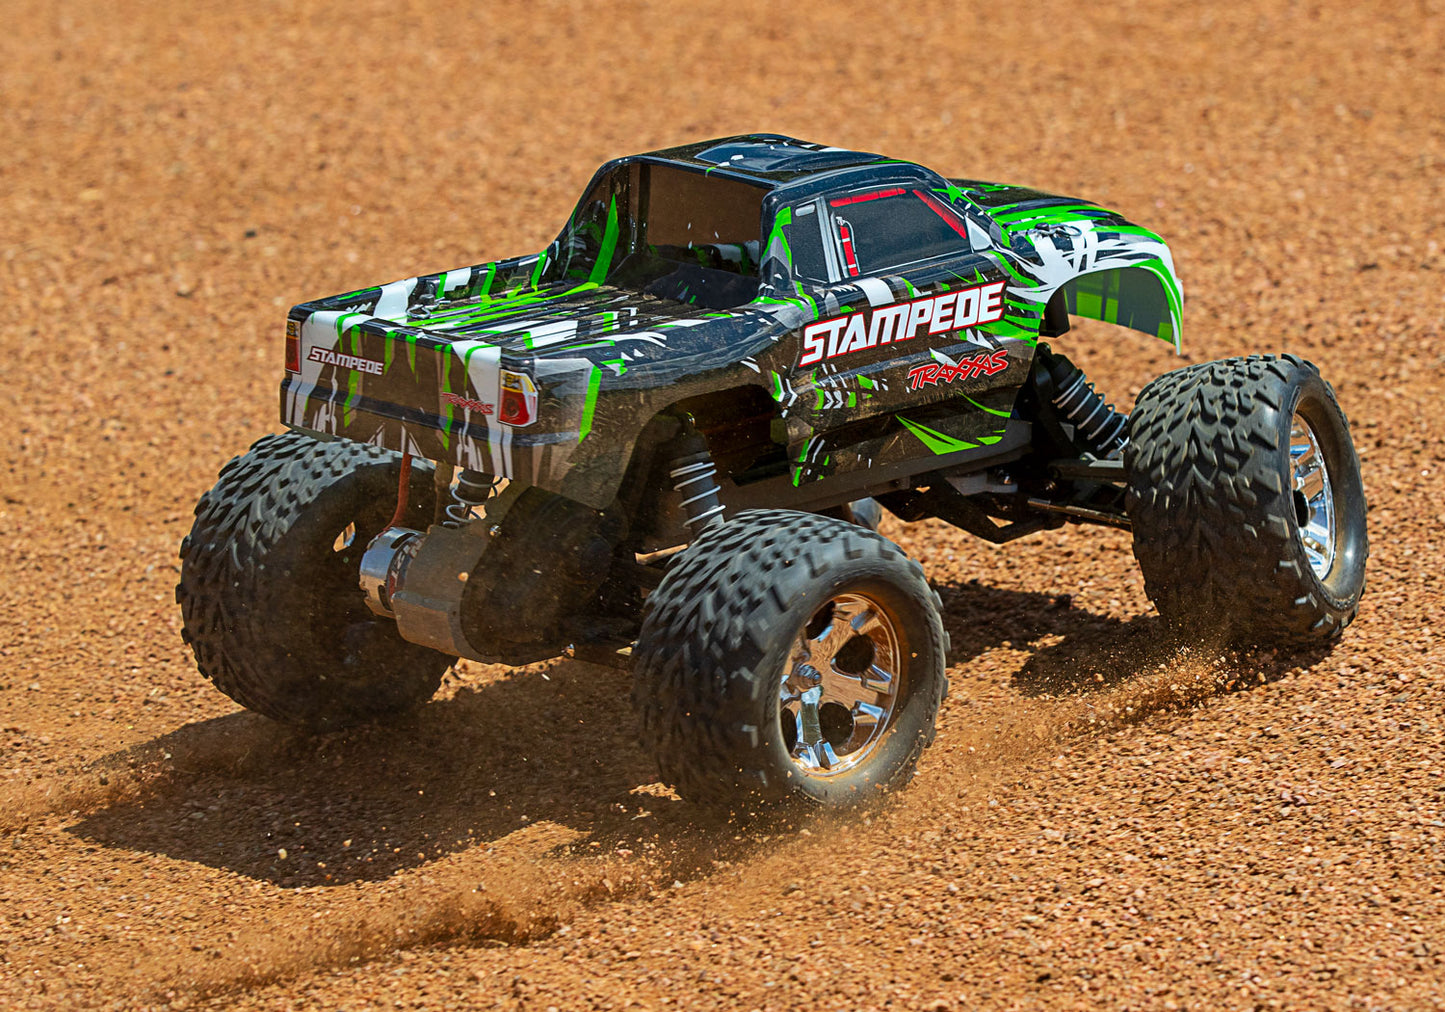 Traxxas Stampede 1/10 2wd XL-5 NO BATTERY OR CHARGER - Green